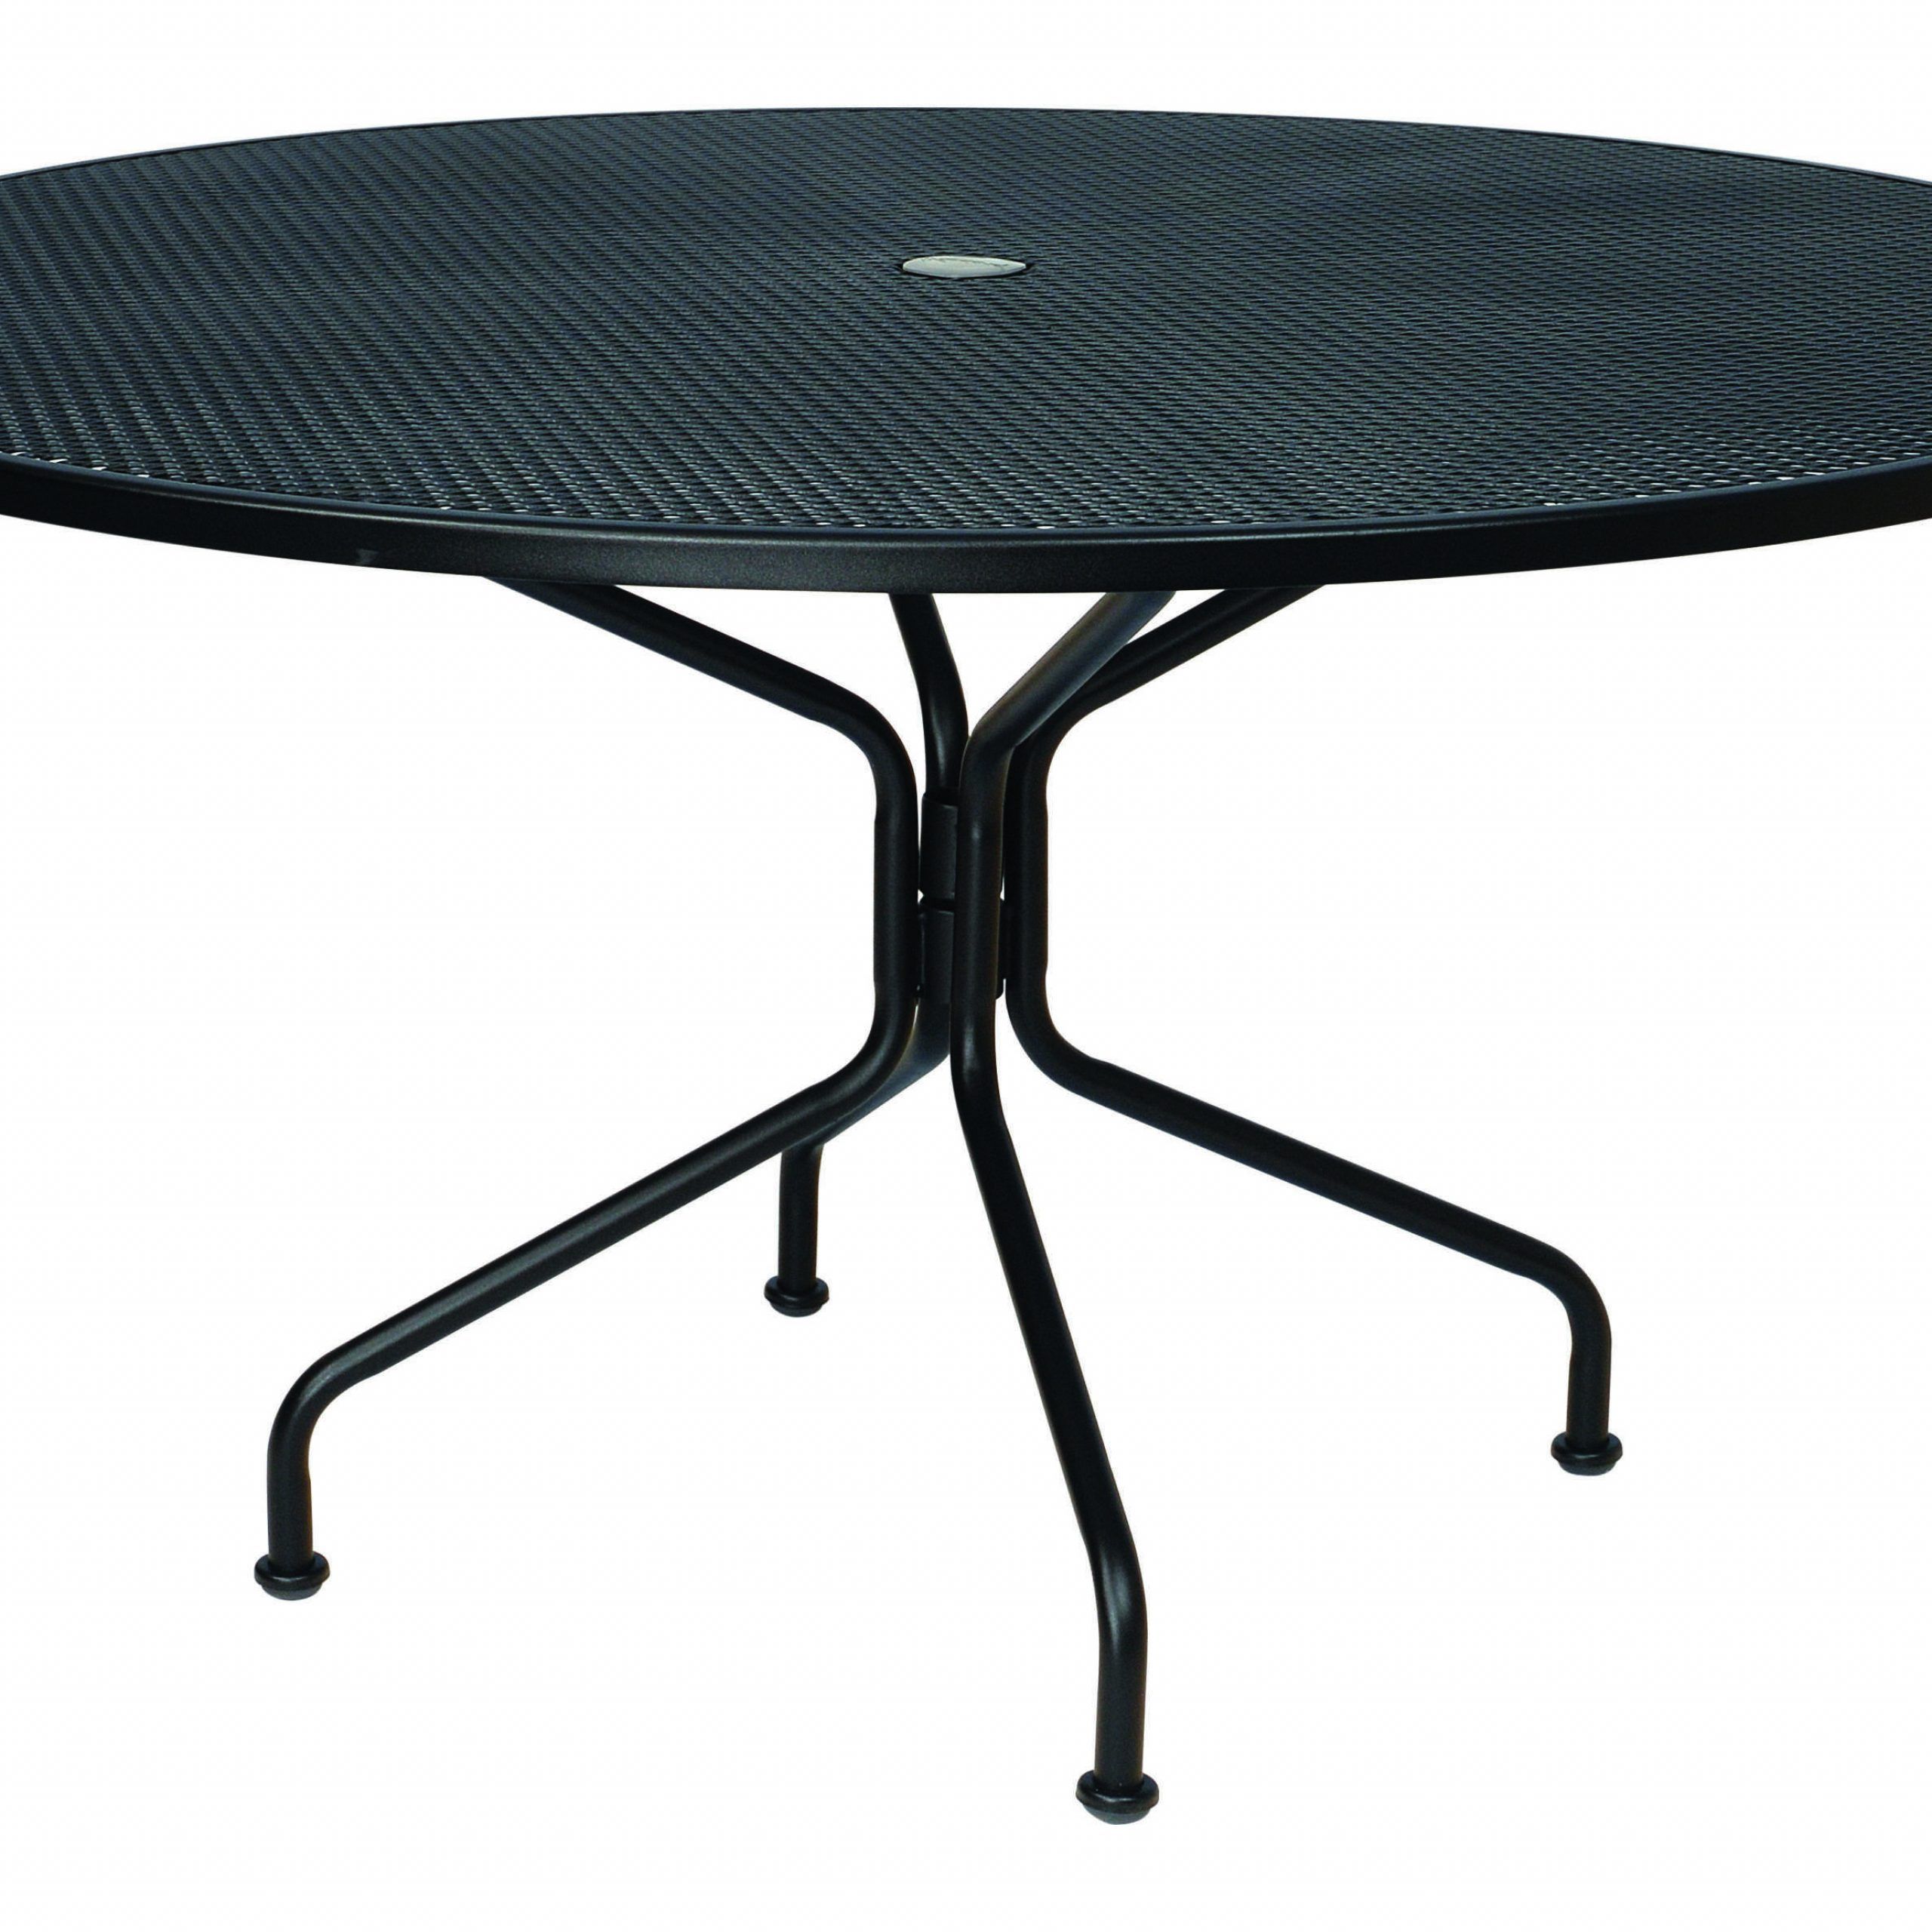 Aztec Round Pedestal Dining Tables Within Best And Newest Woodard Wrought Iron 54 Round 8 Spoke Table With Umbrella Hole (View 24 of 25)